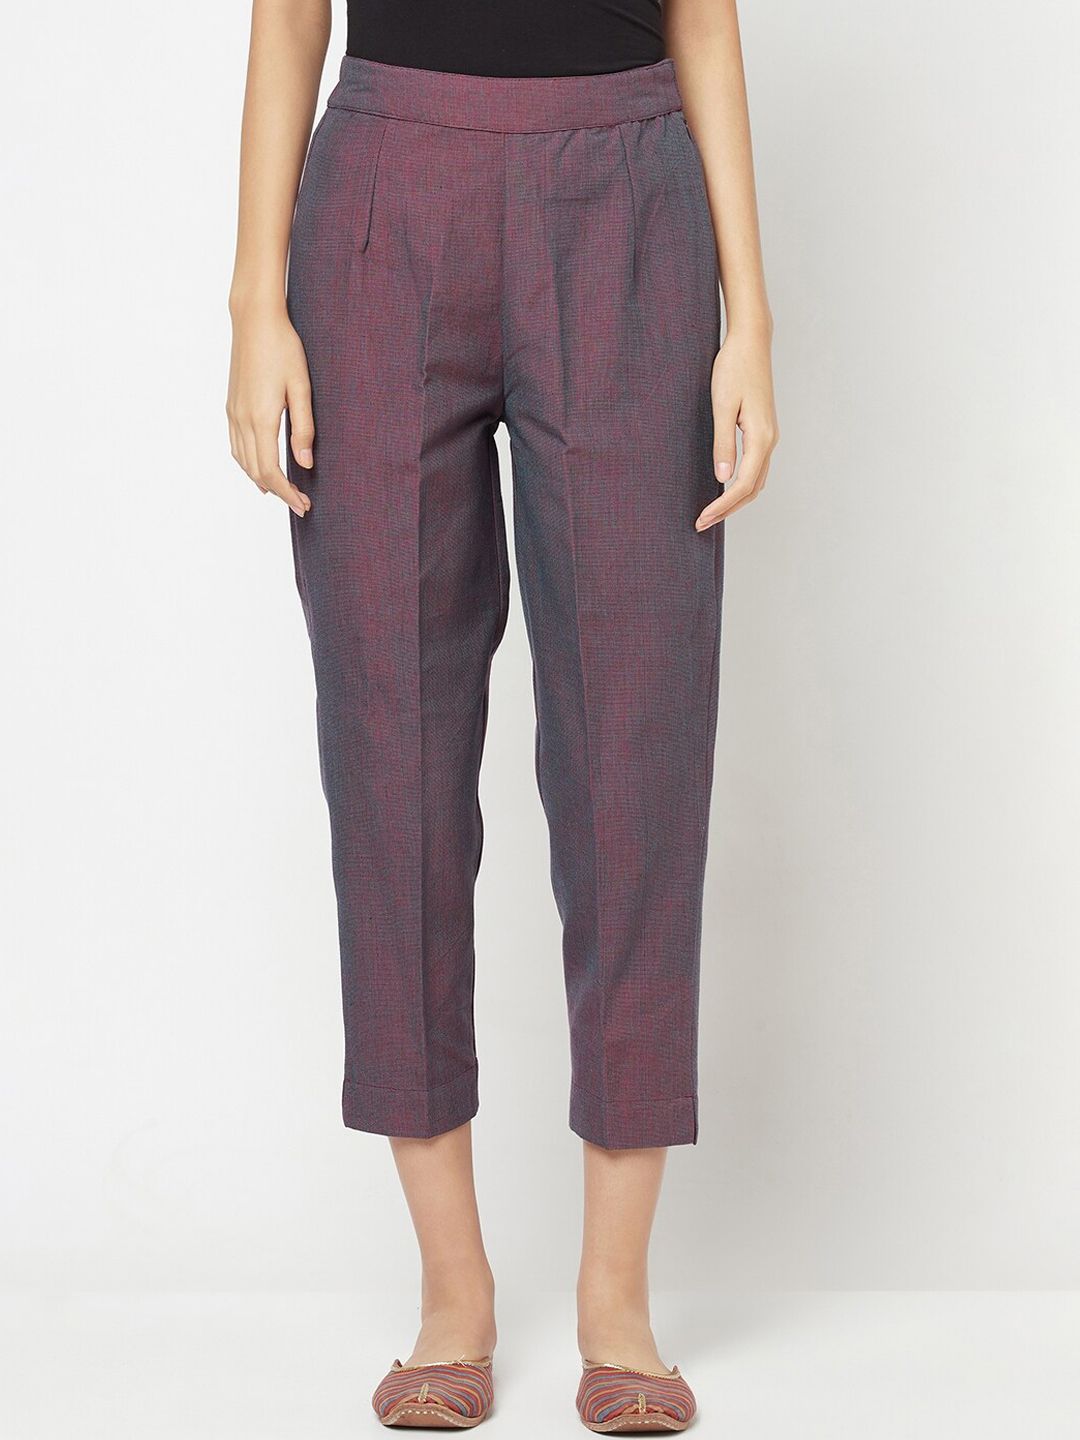 Fabindia Women Maroon Slim Fit Pleated Cotton Peg Trousers Price in India